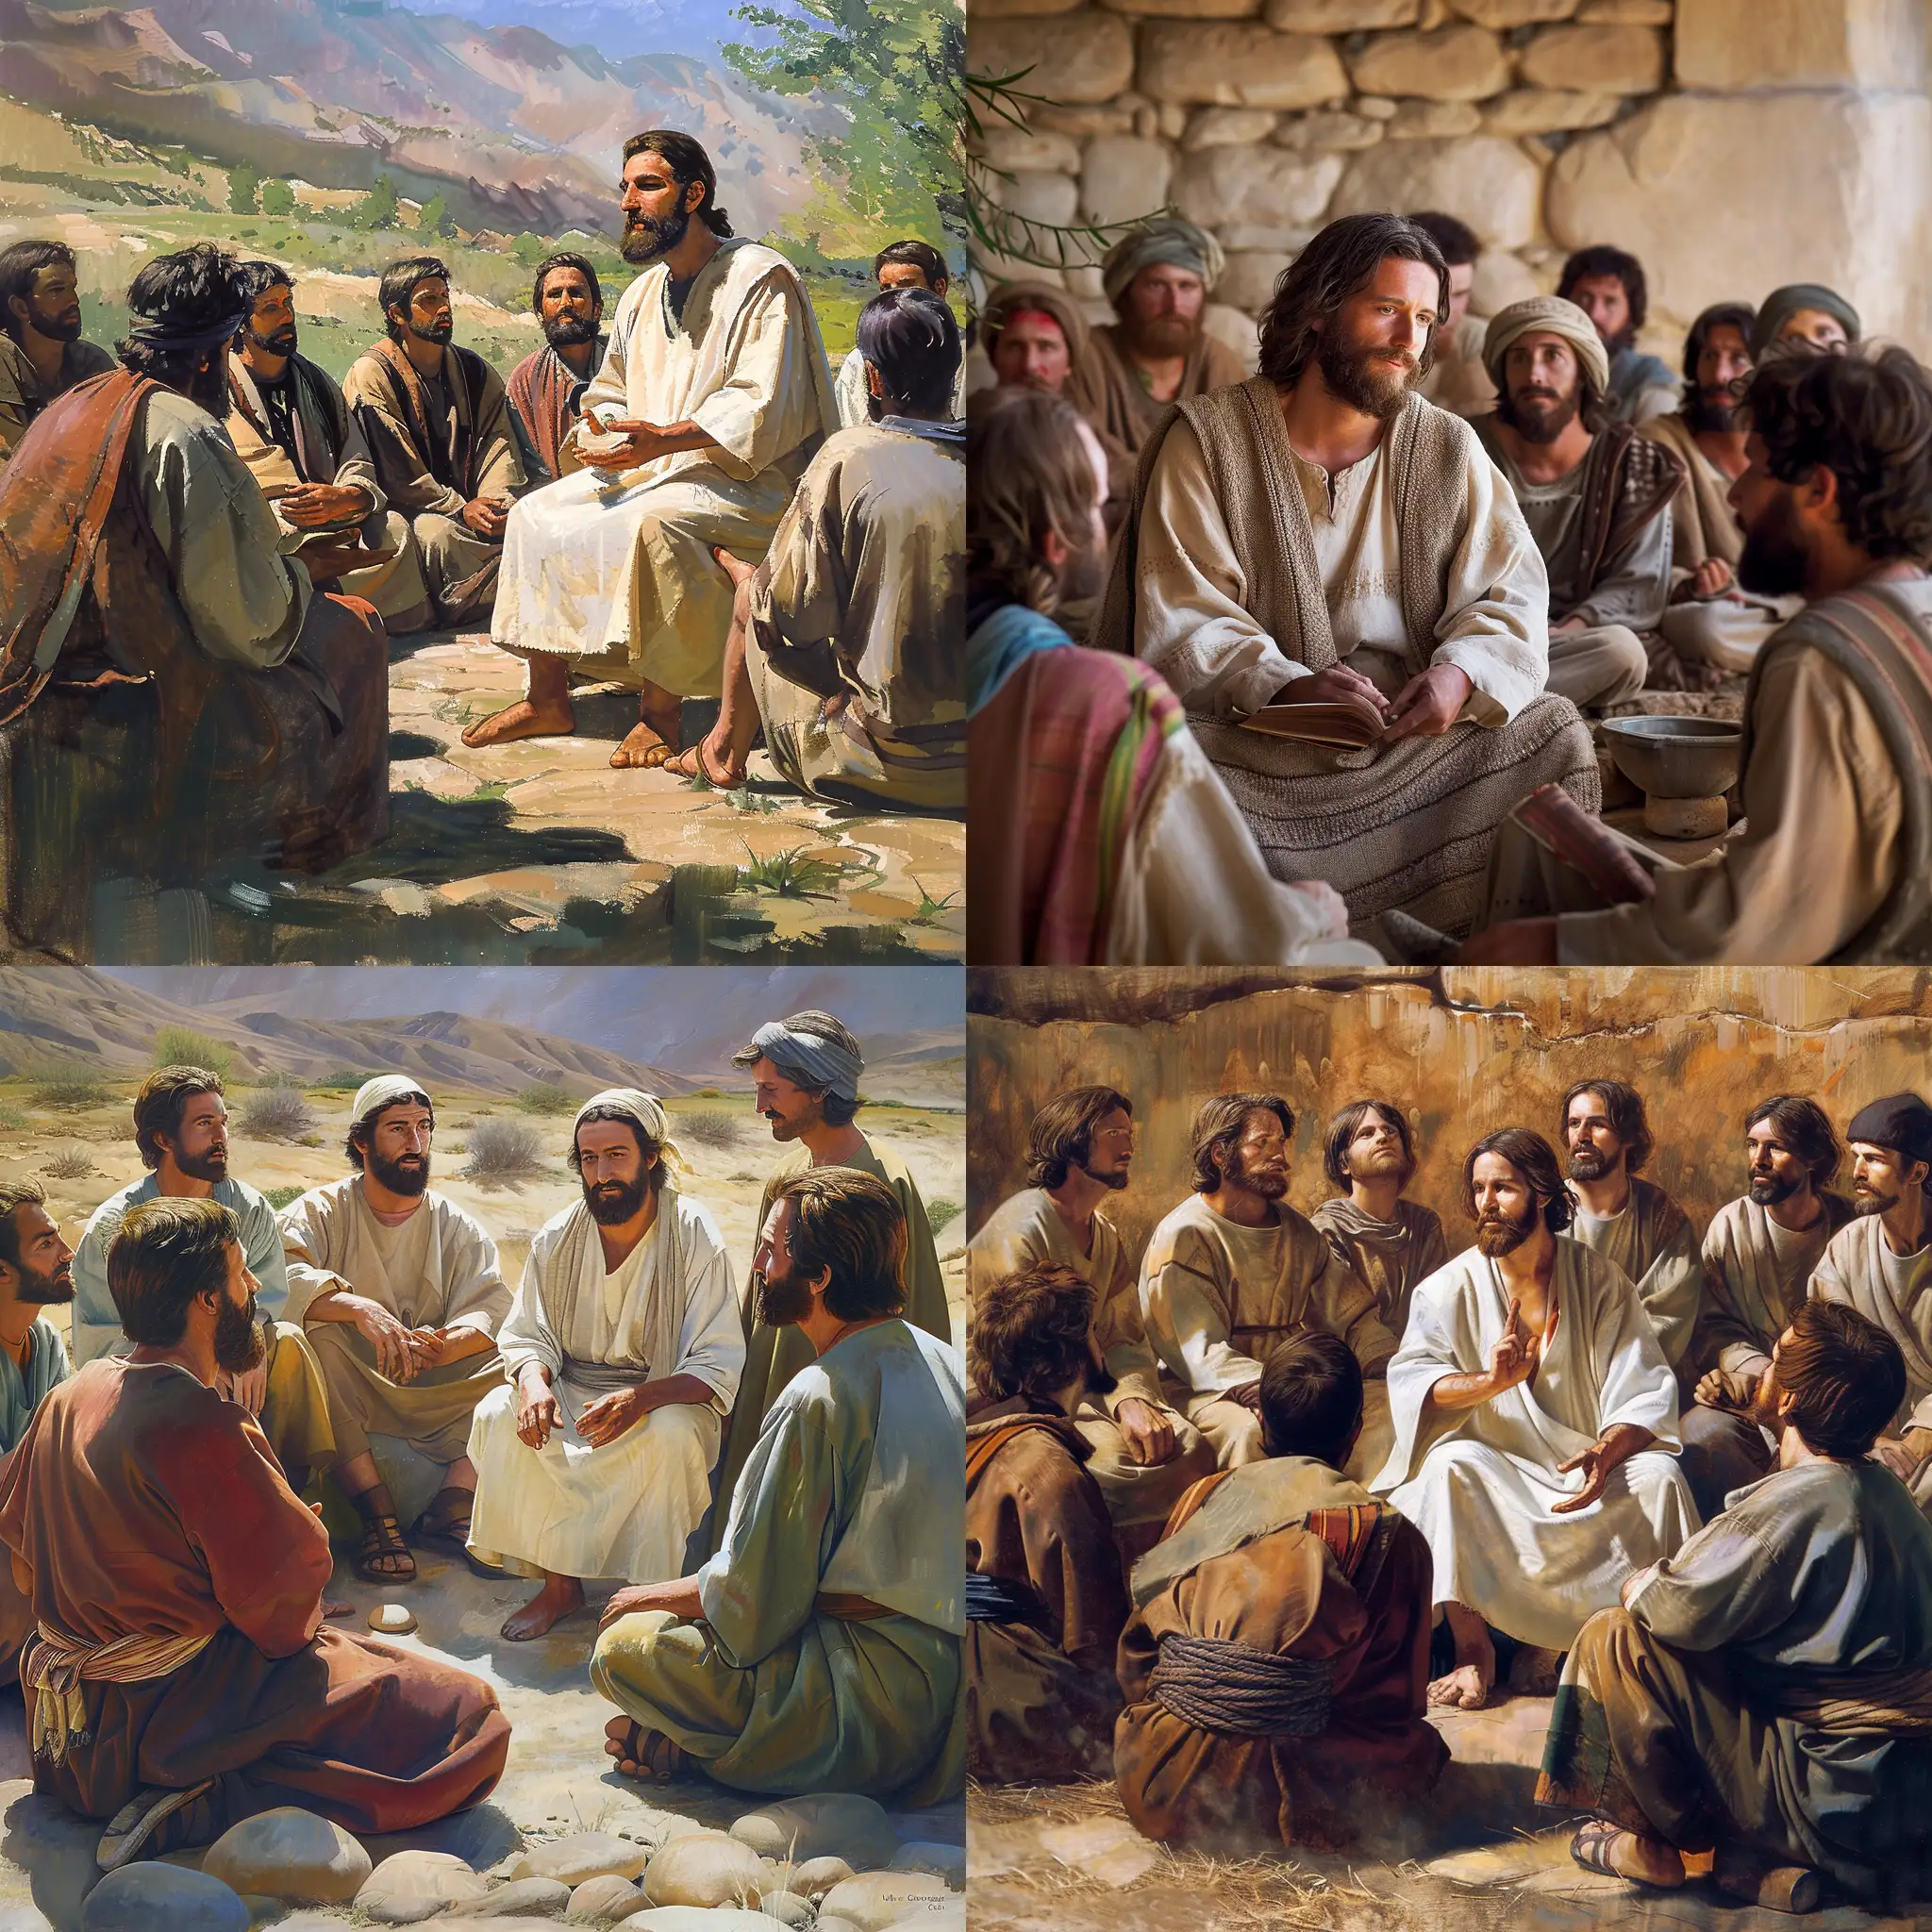 Jesus Christ teaching the revelation of God to his disciples